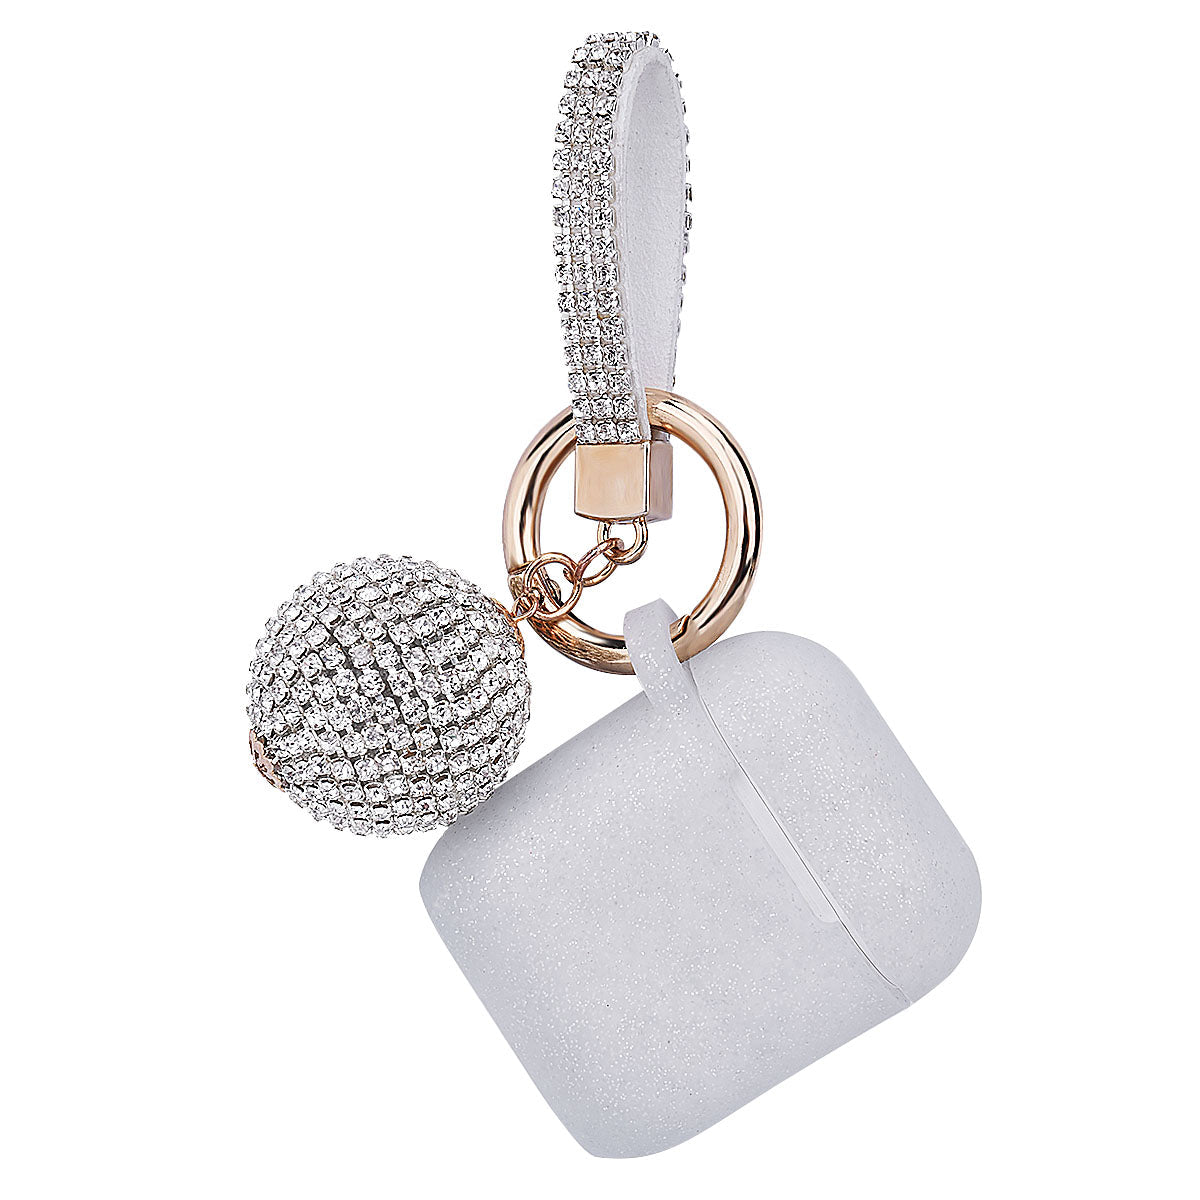 Sparkly Fashion Air Pod Case Protector For Apple Air Pods | Speidel